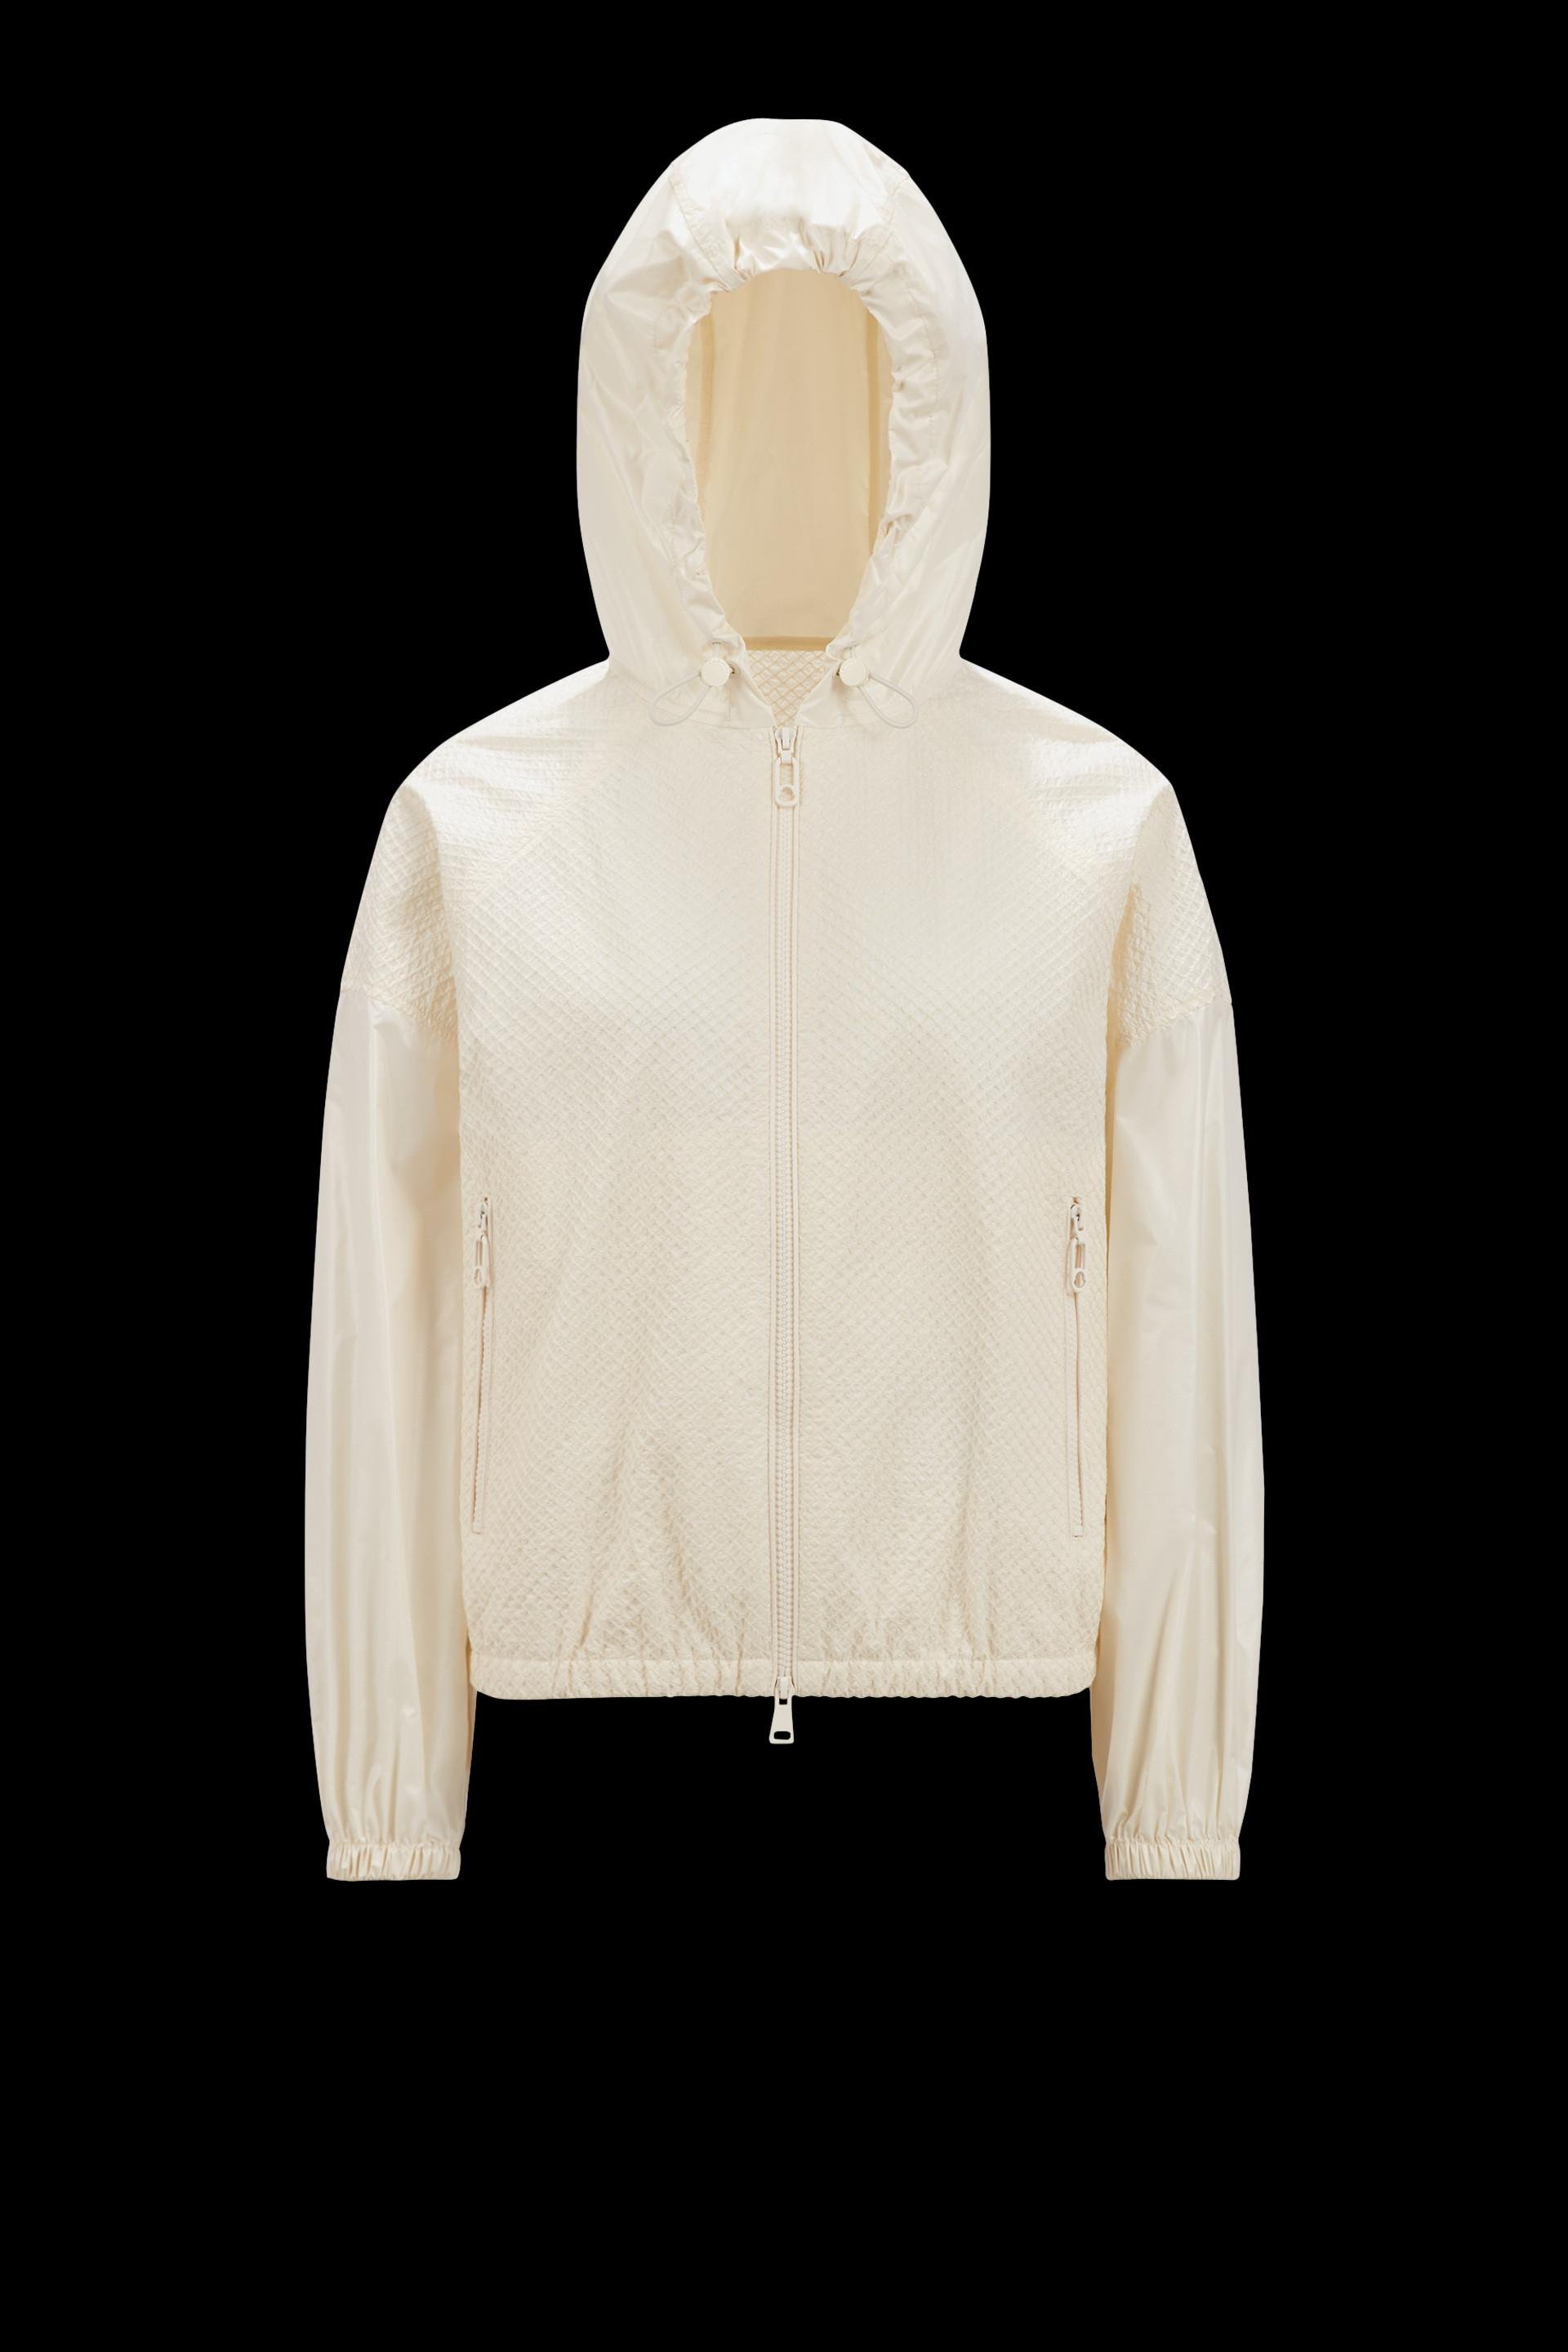 Edipo Hooded Jacket by MONCLER